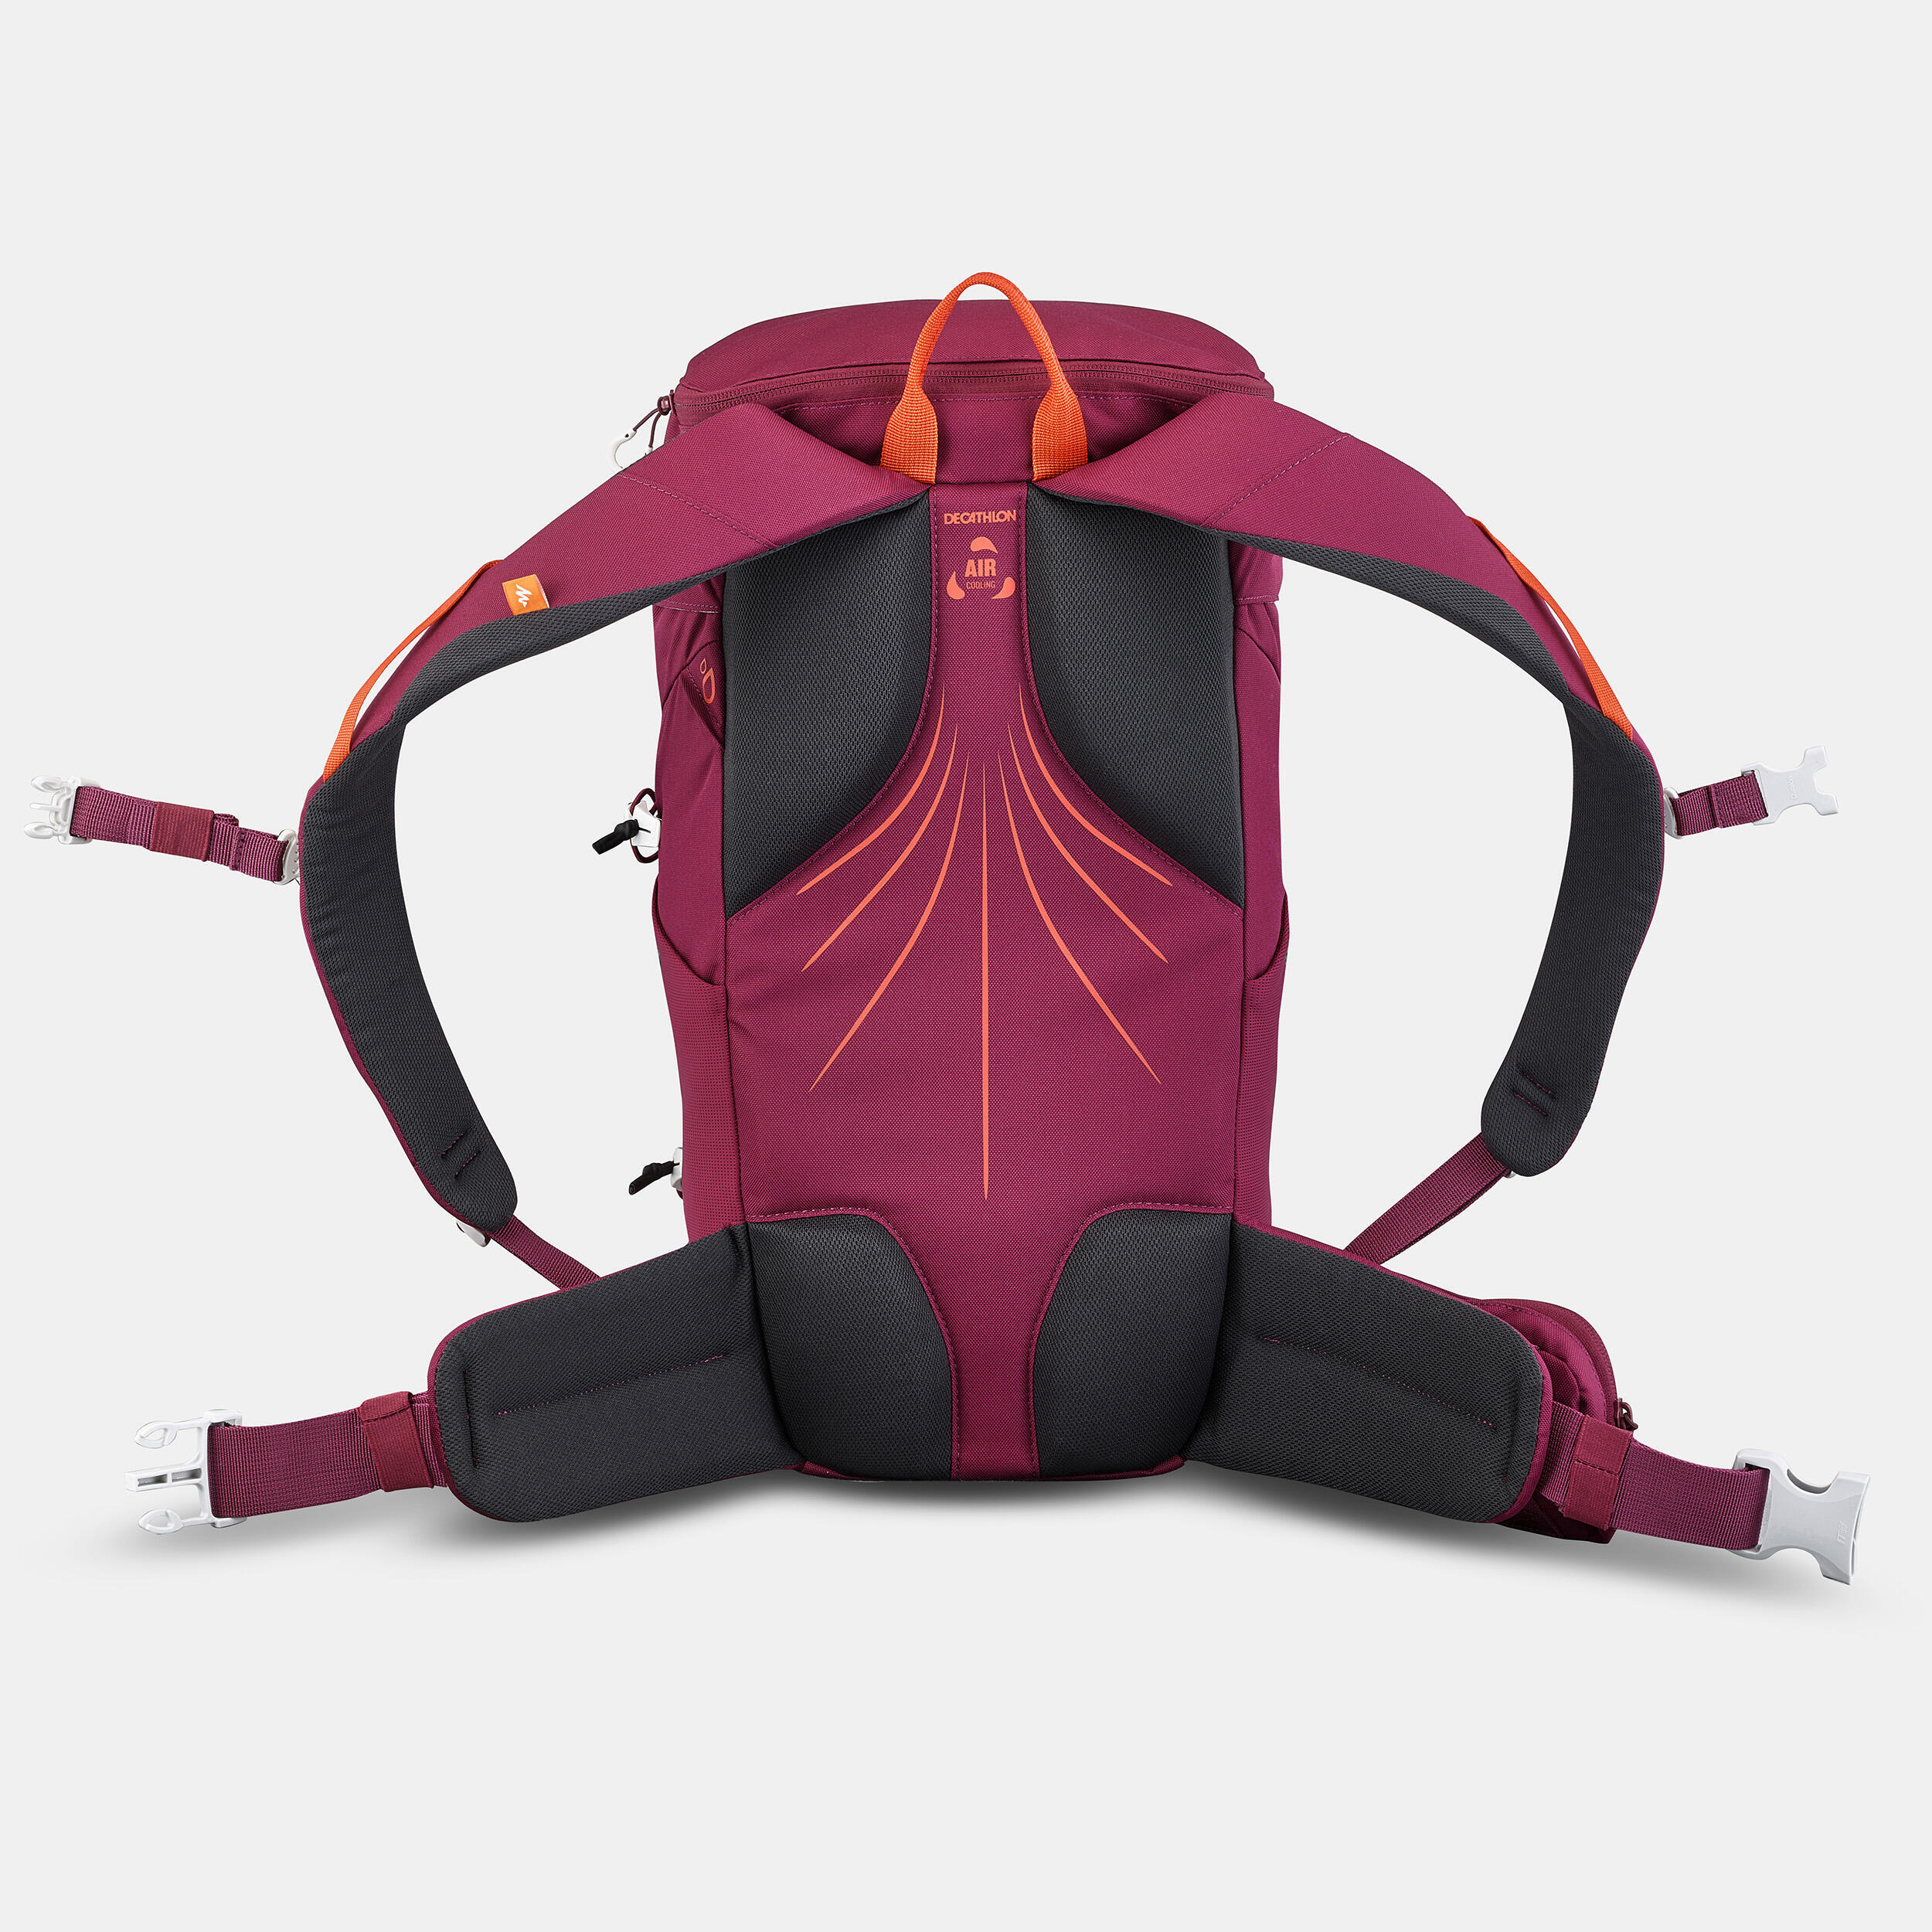 Mountain hiking backpack 20L - MH100 13/15